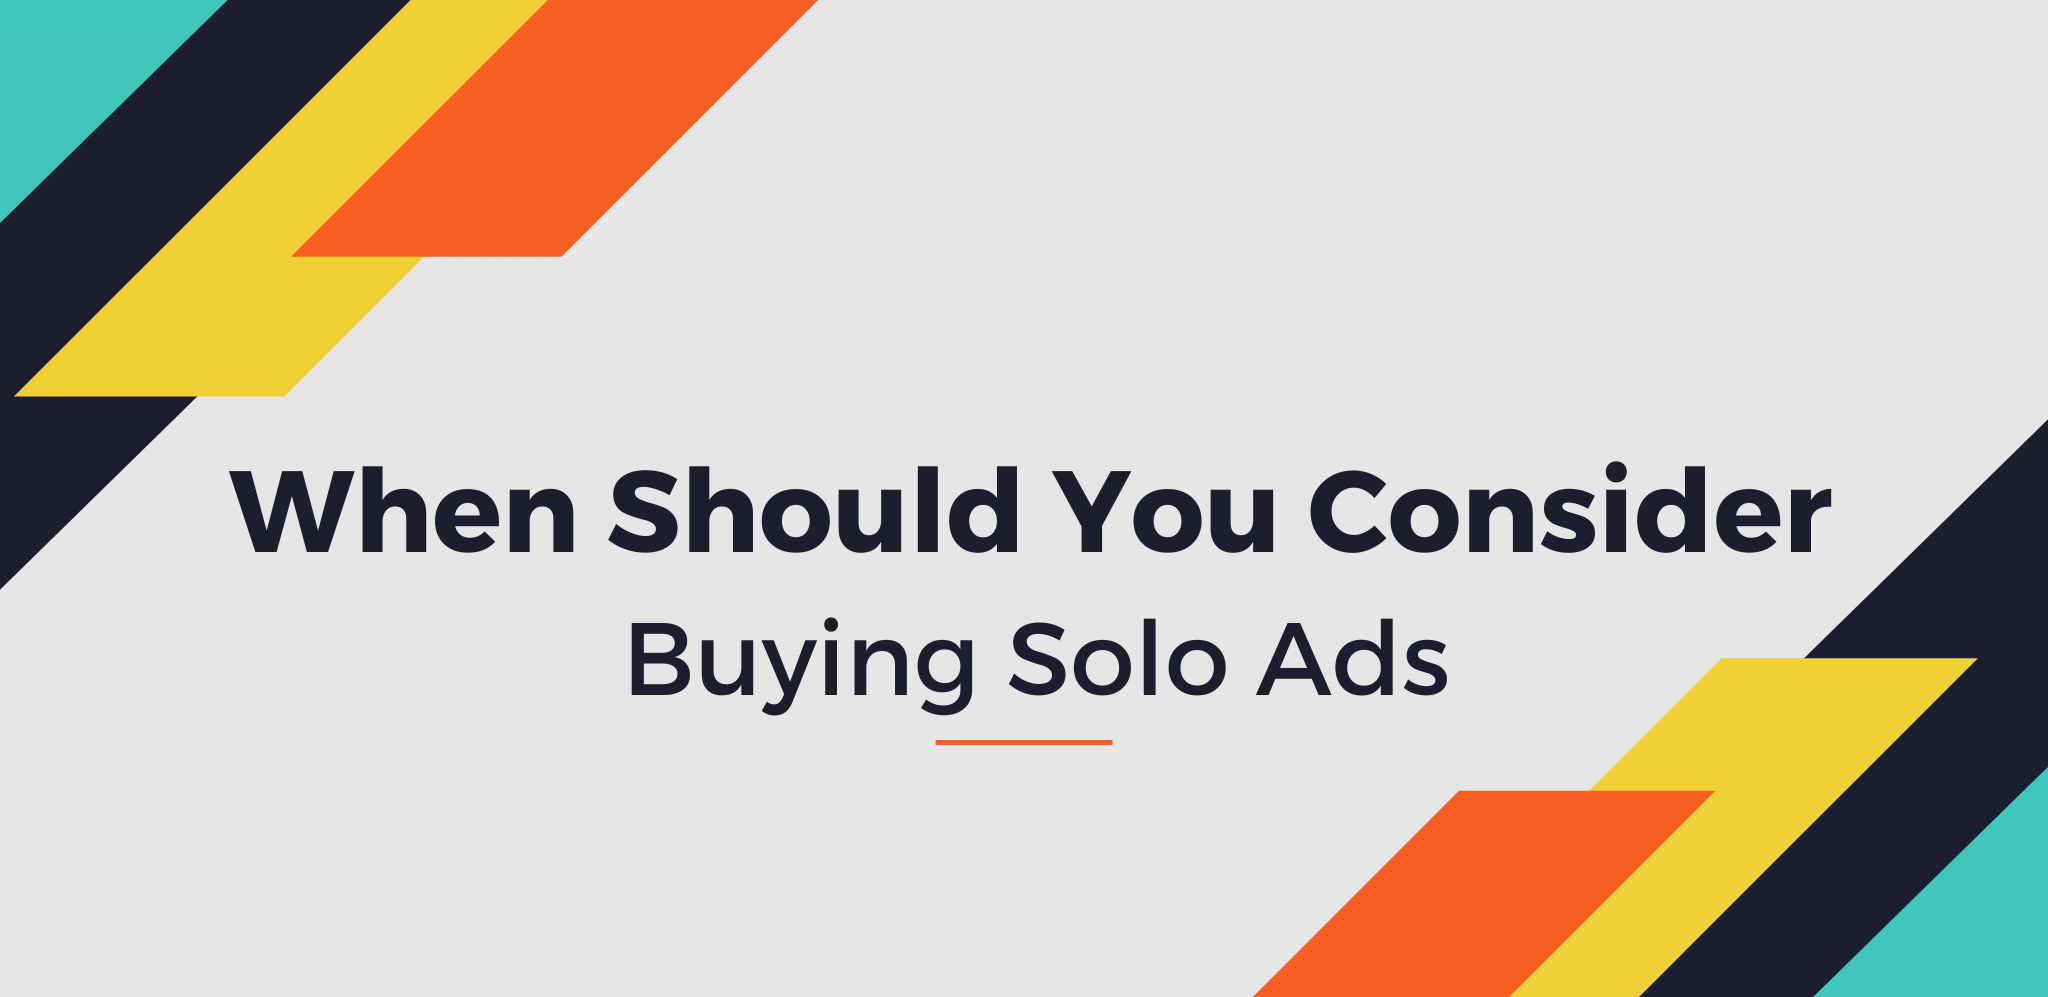 When Should You Consider Buying Solo Ads